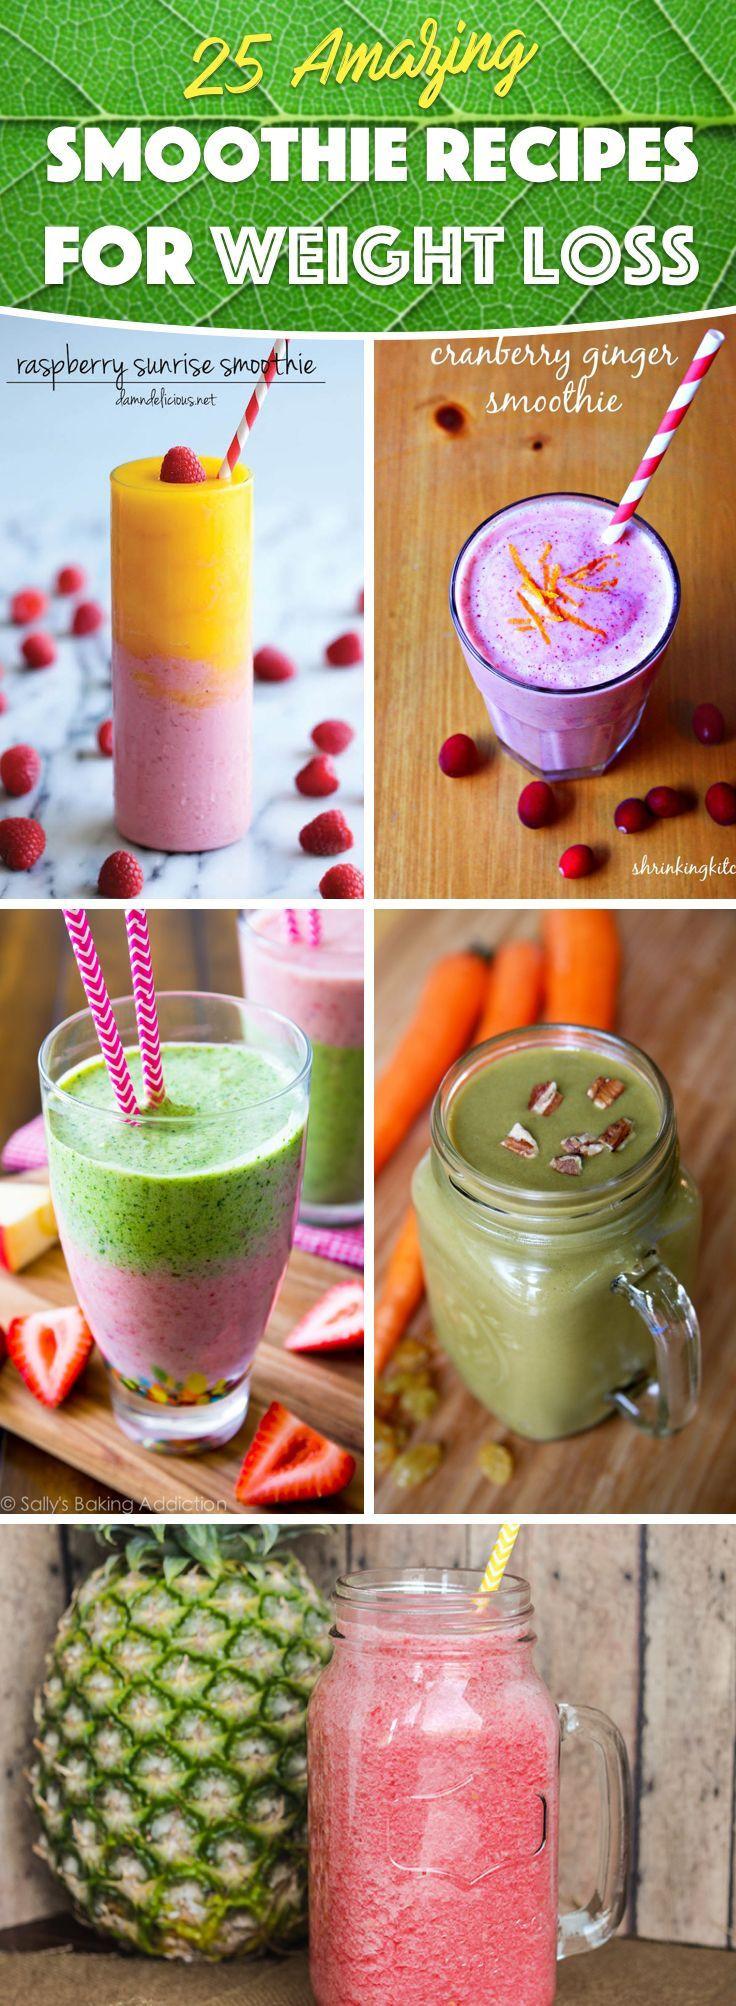 Diabetic Smoothies To Lose Weight
 Best 25 Diabetic smoothie recipes ideas on Pinterest